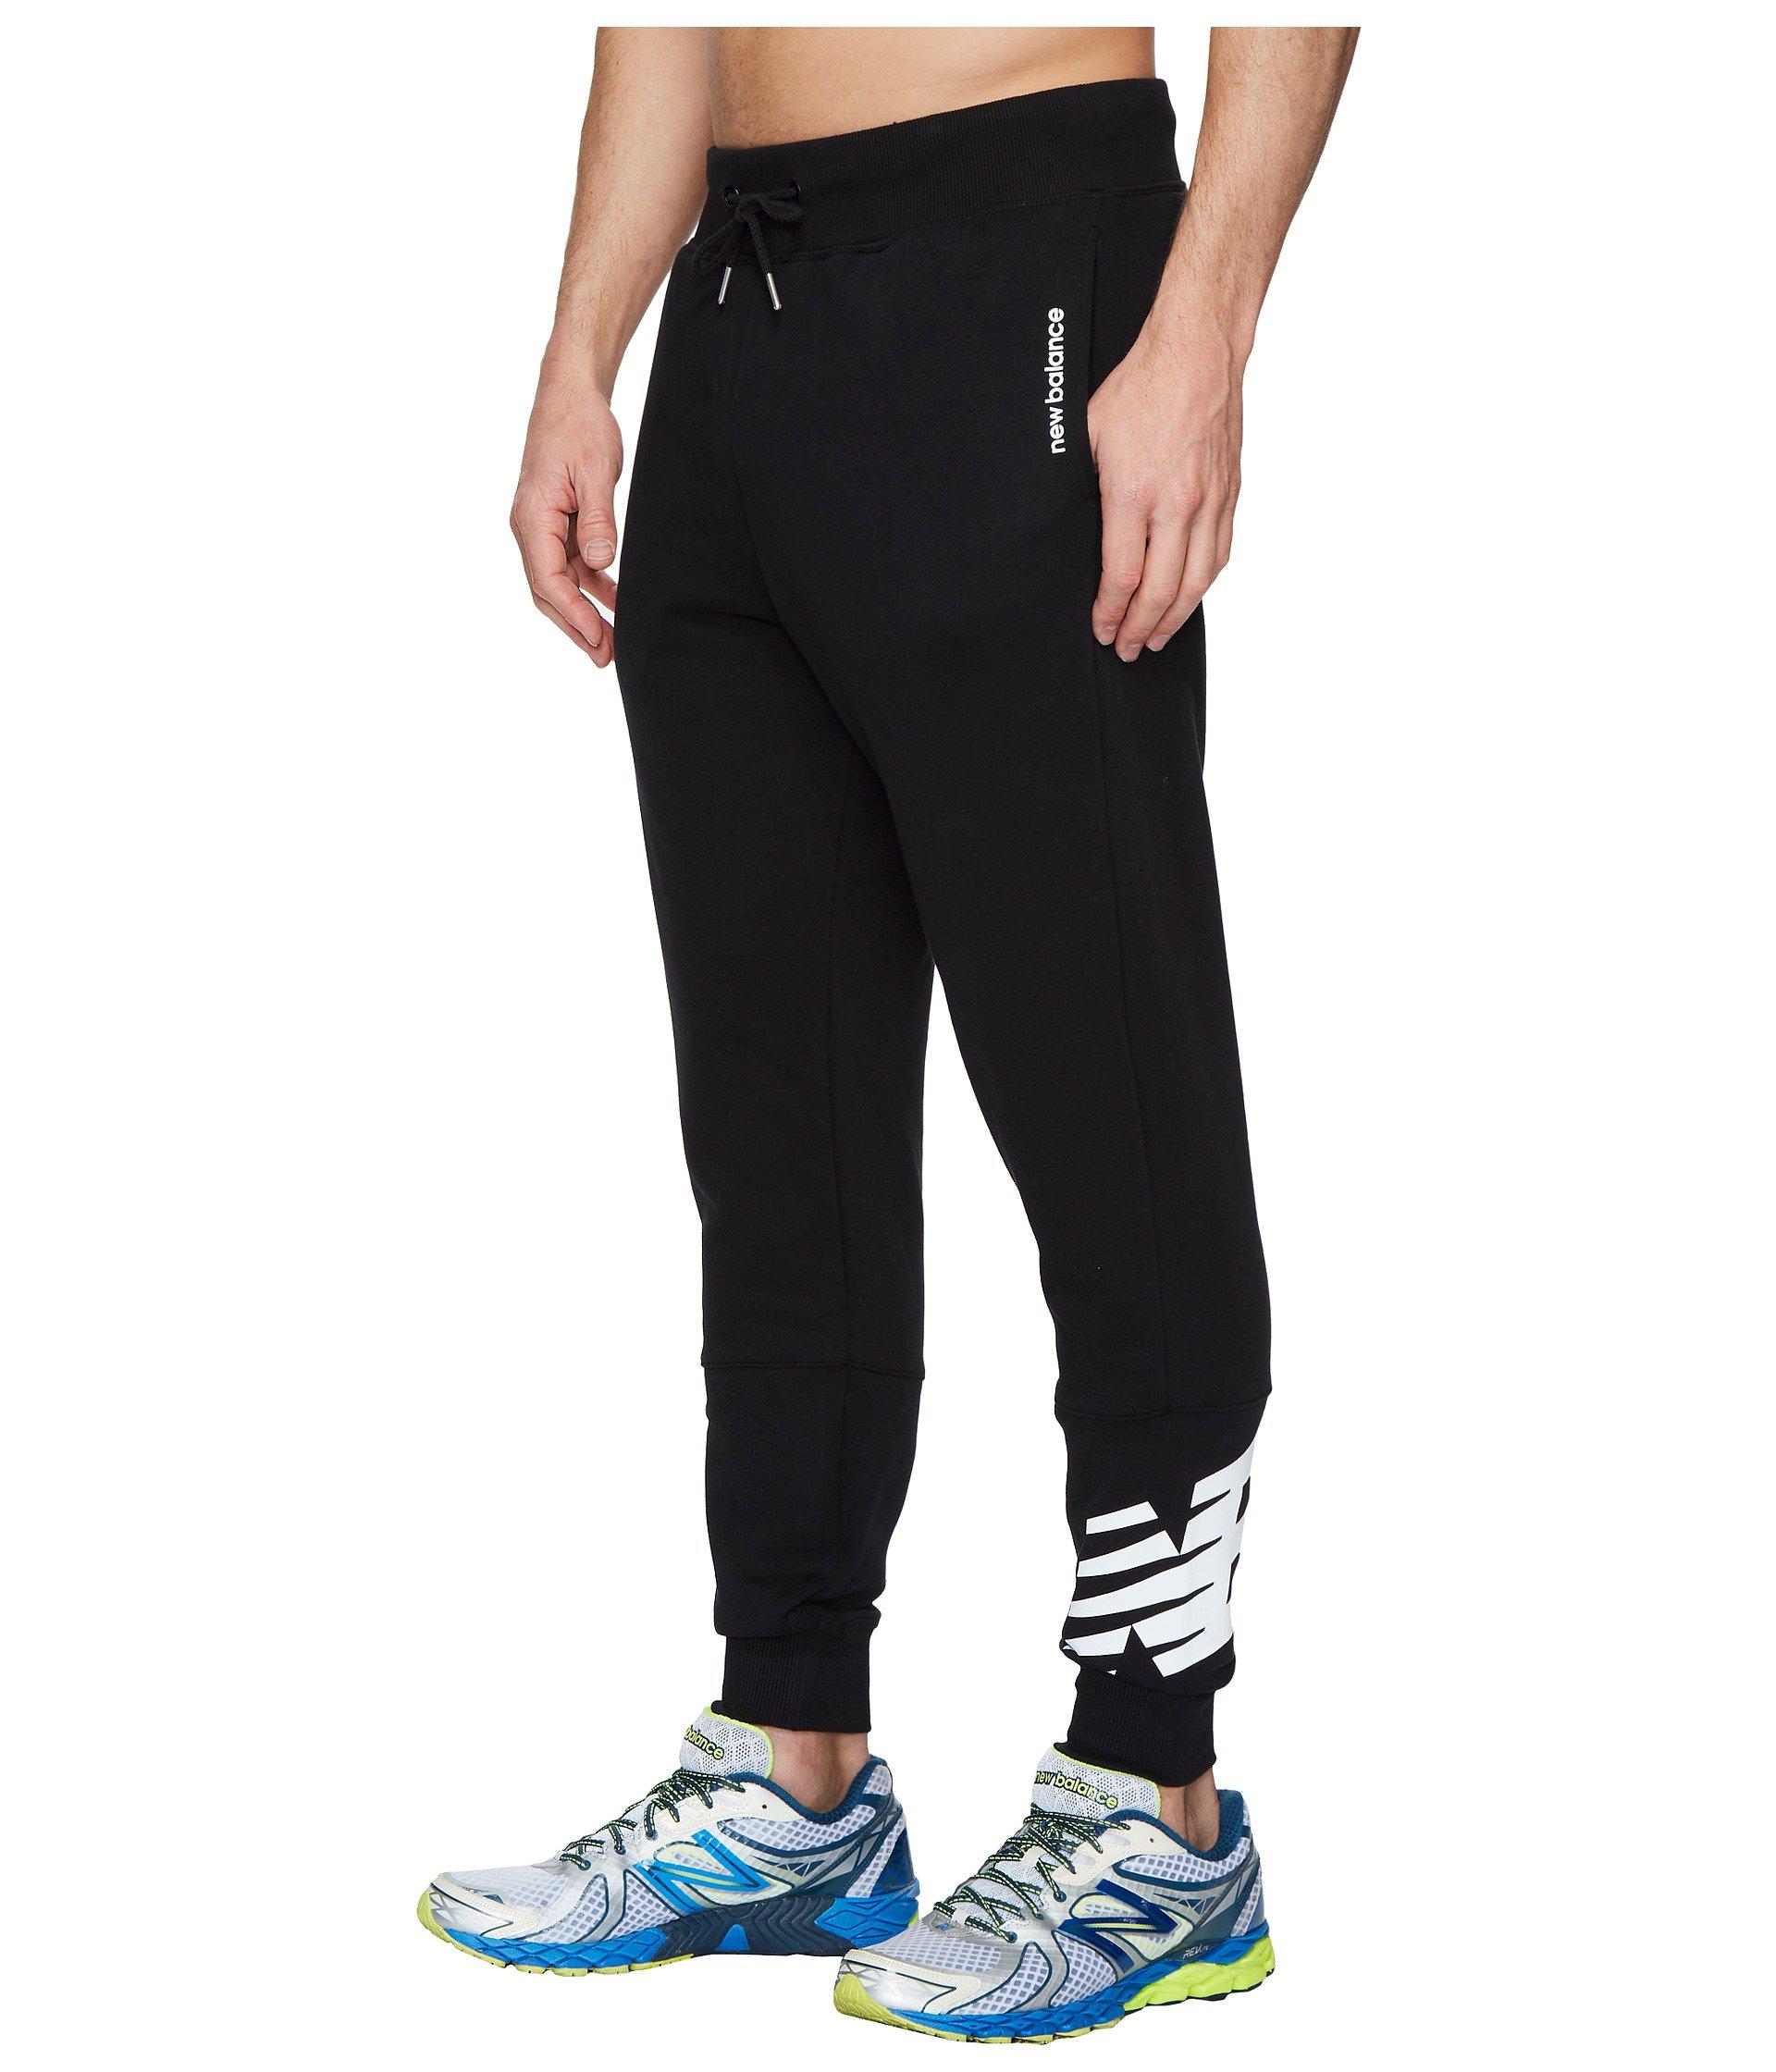 New Balance Cotton Essentials Ft Graphic Sweatpants in Black for Men - Lyst